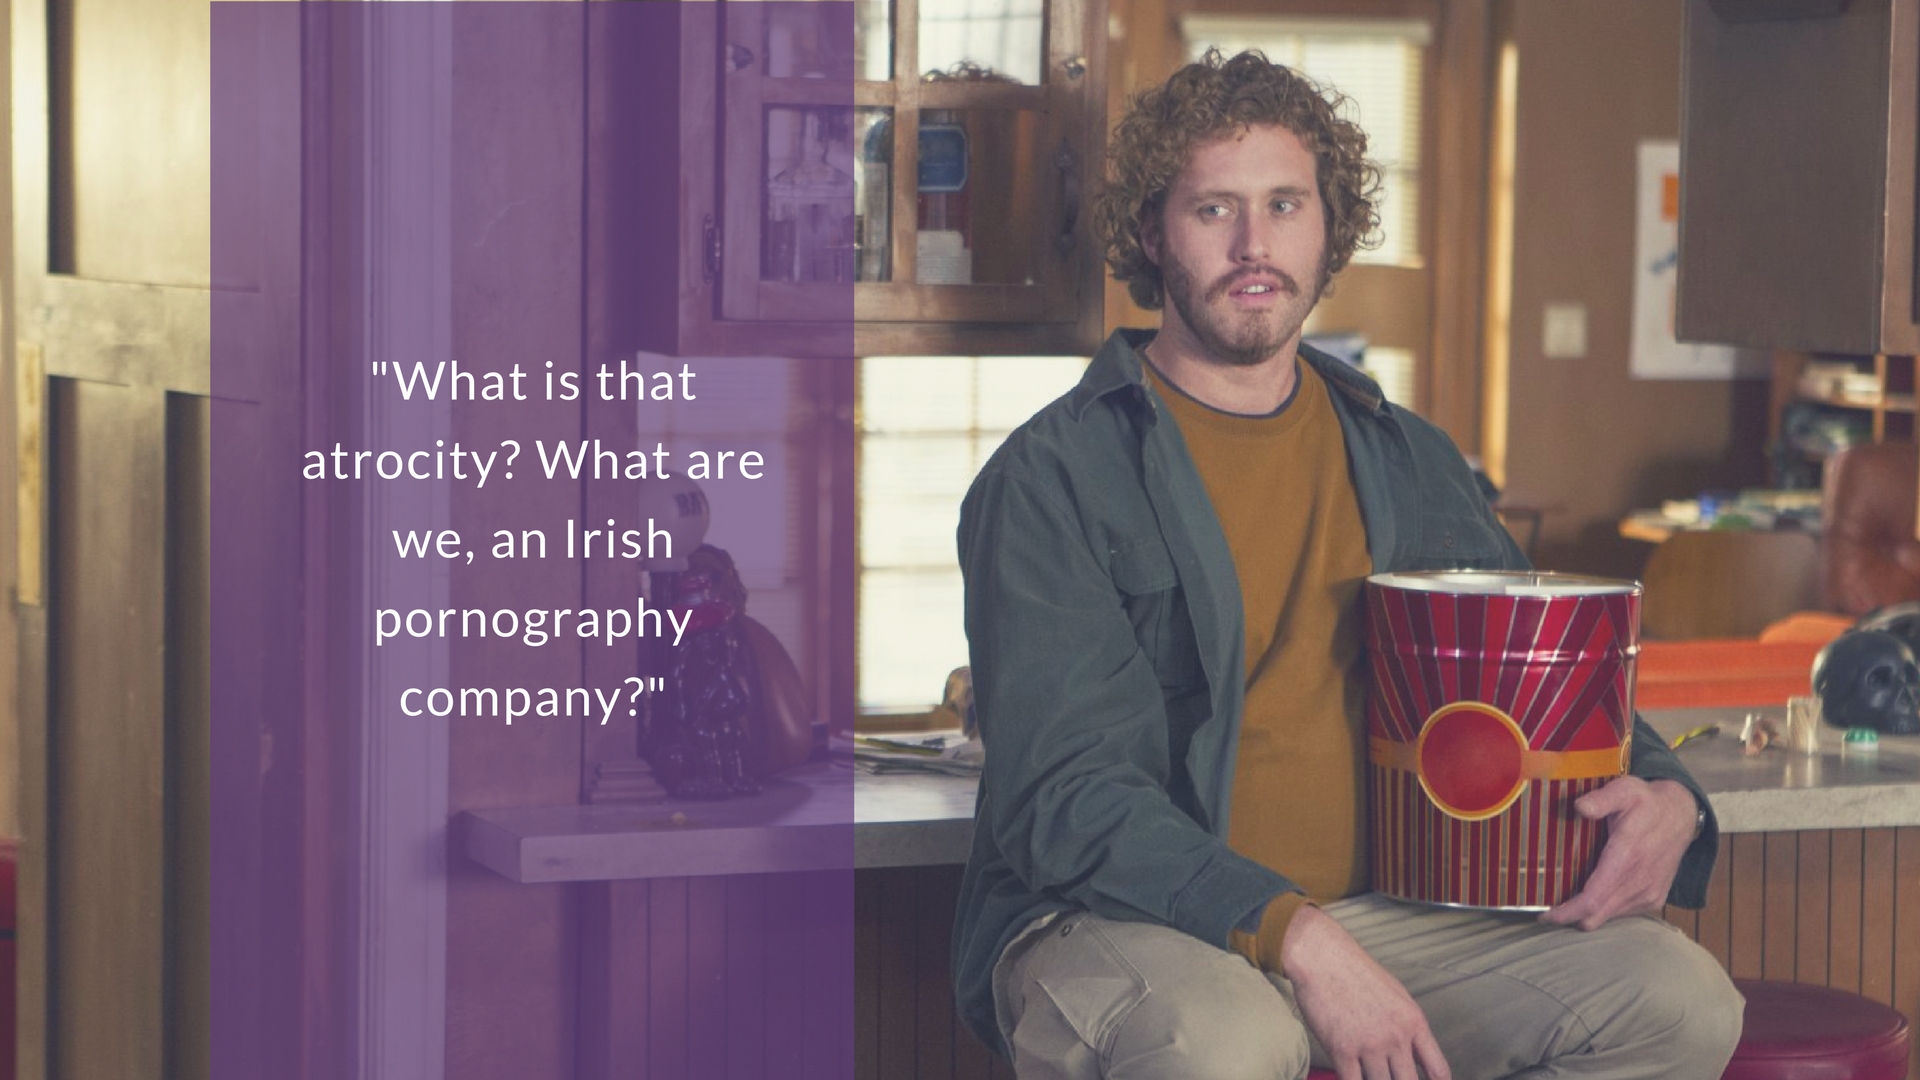 Erlich Bachman’s Funniest Quotes - The Stremio Blog